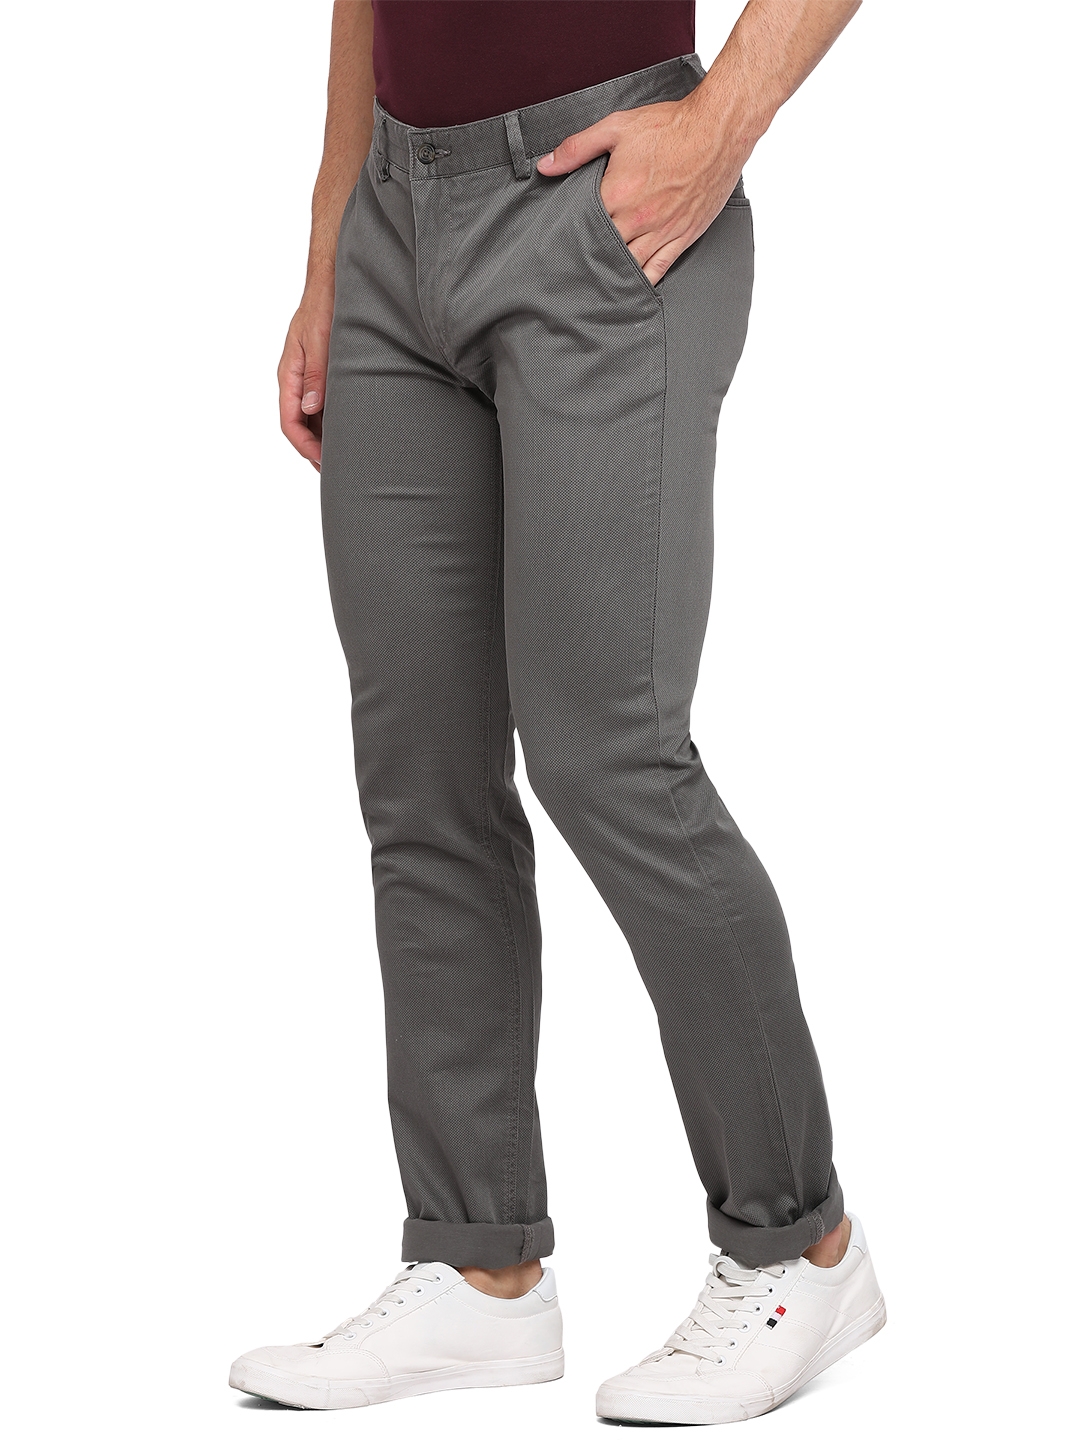 Greenfibre | Grey Solid Slim Fit Casual Trouser | Greenfibre 1